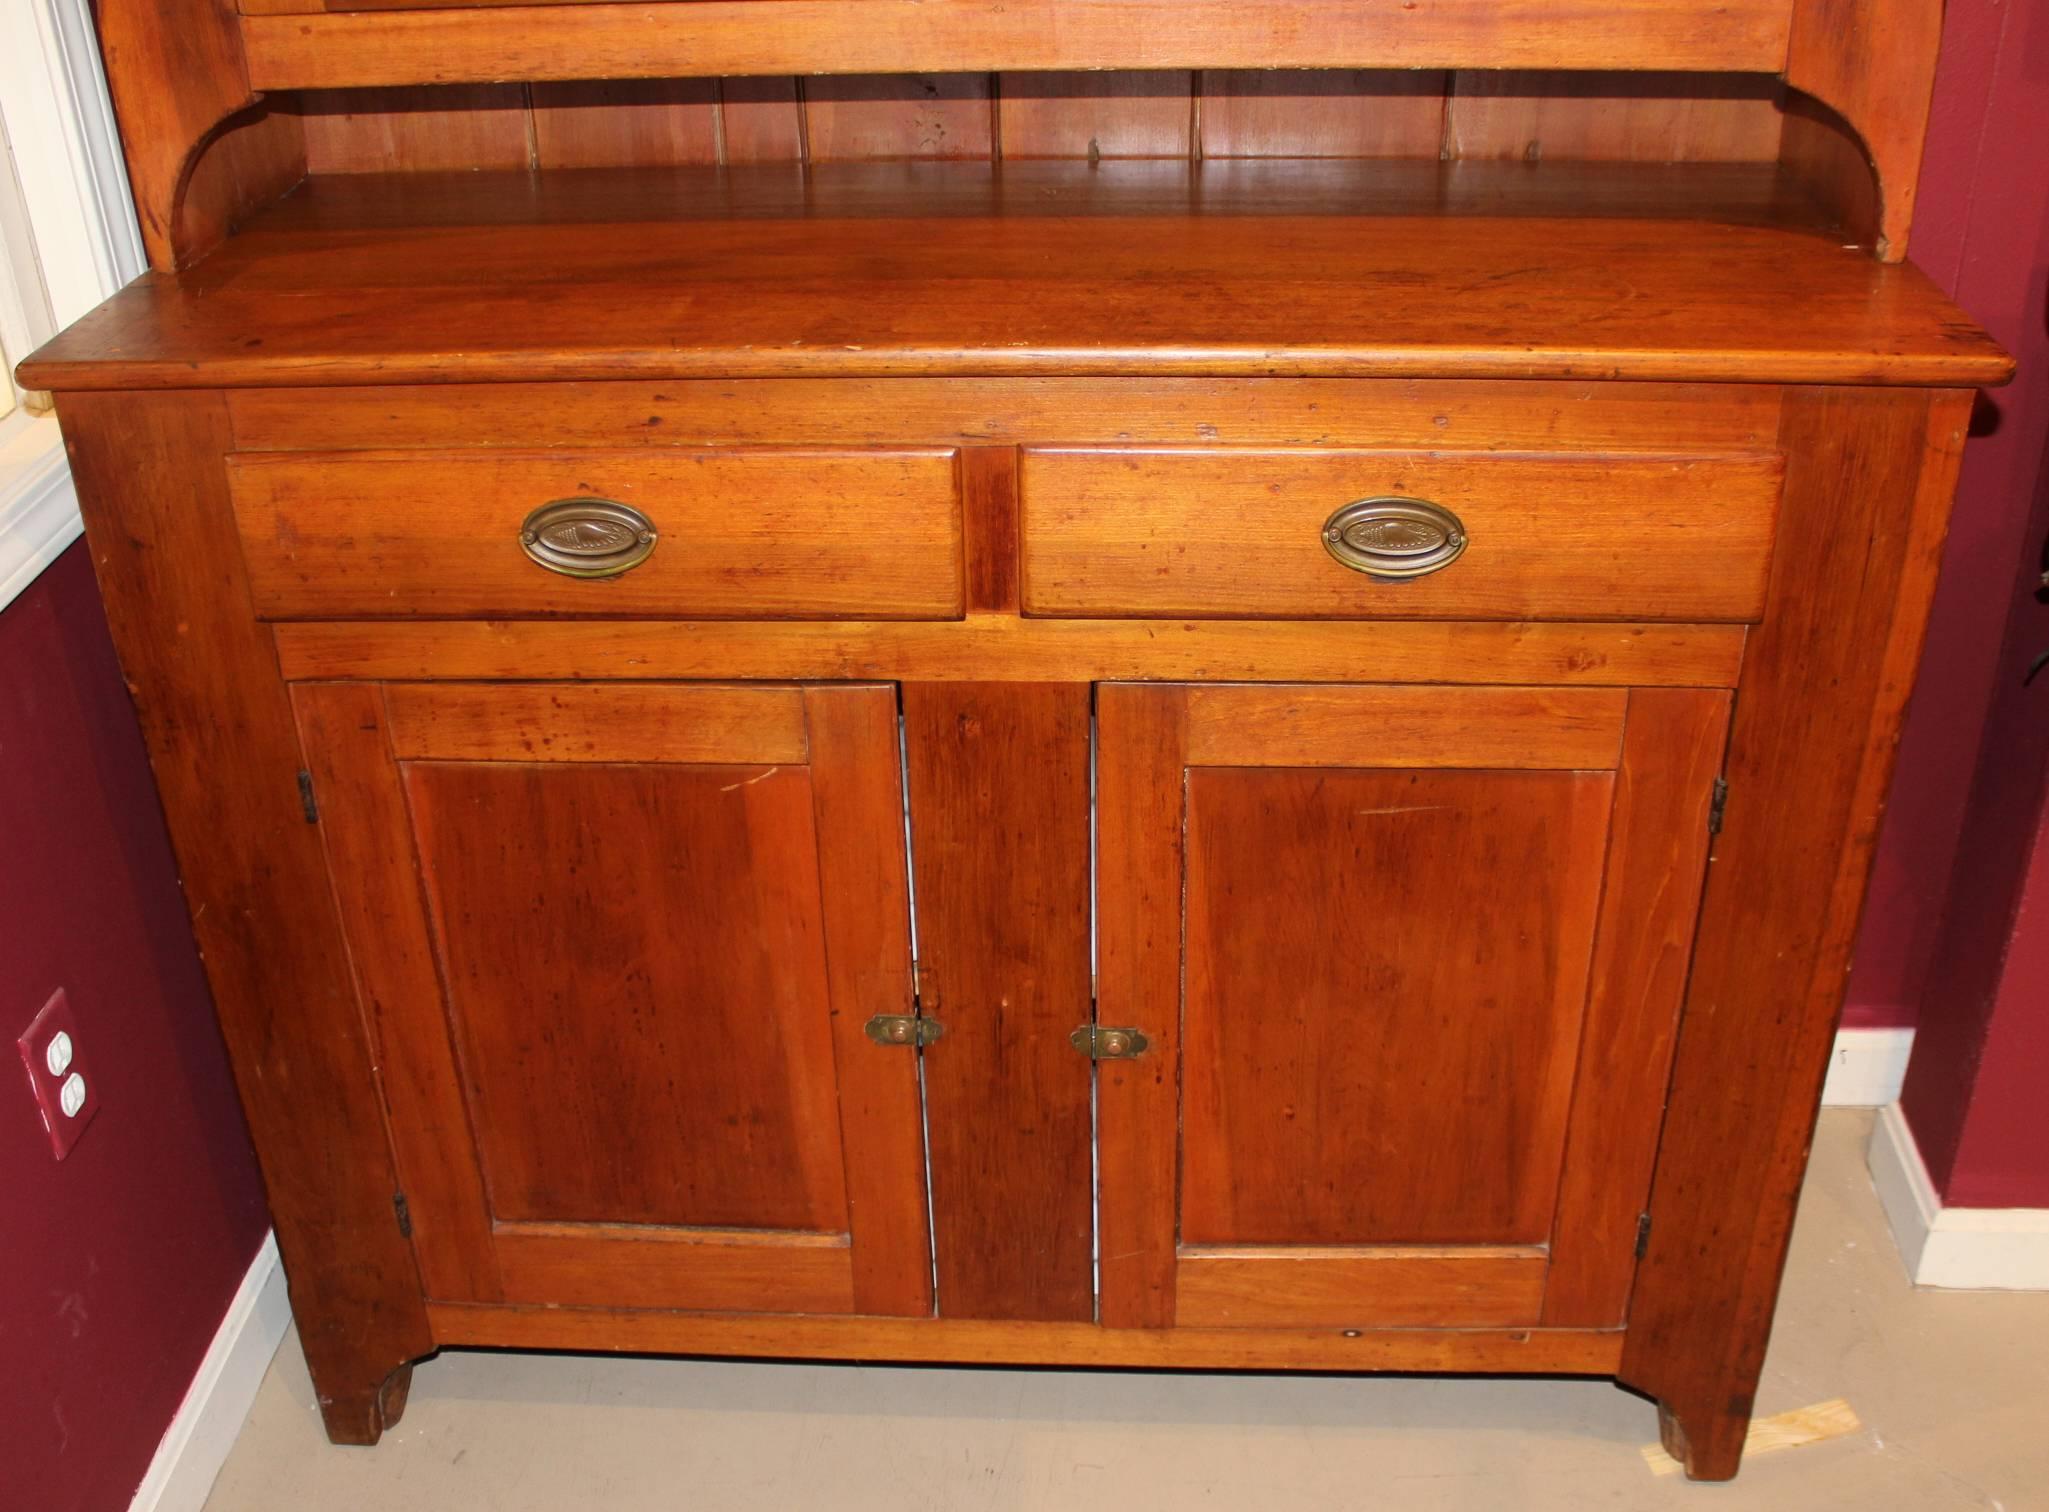 A fine two-piece pine step back cupboard in old restored red wash finish, its upper case with a molded cornice over two six pane glazed doors with wavy glass panels, opening to two interior shelves with tongue and groove backing, and its lower case